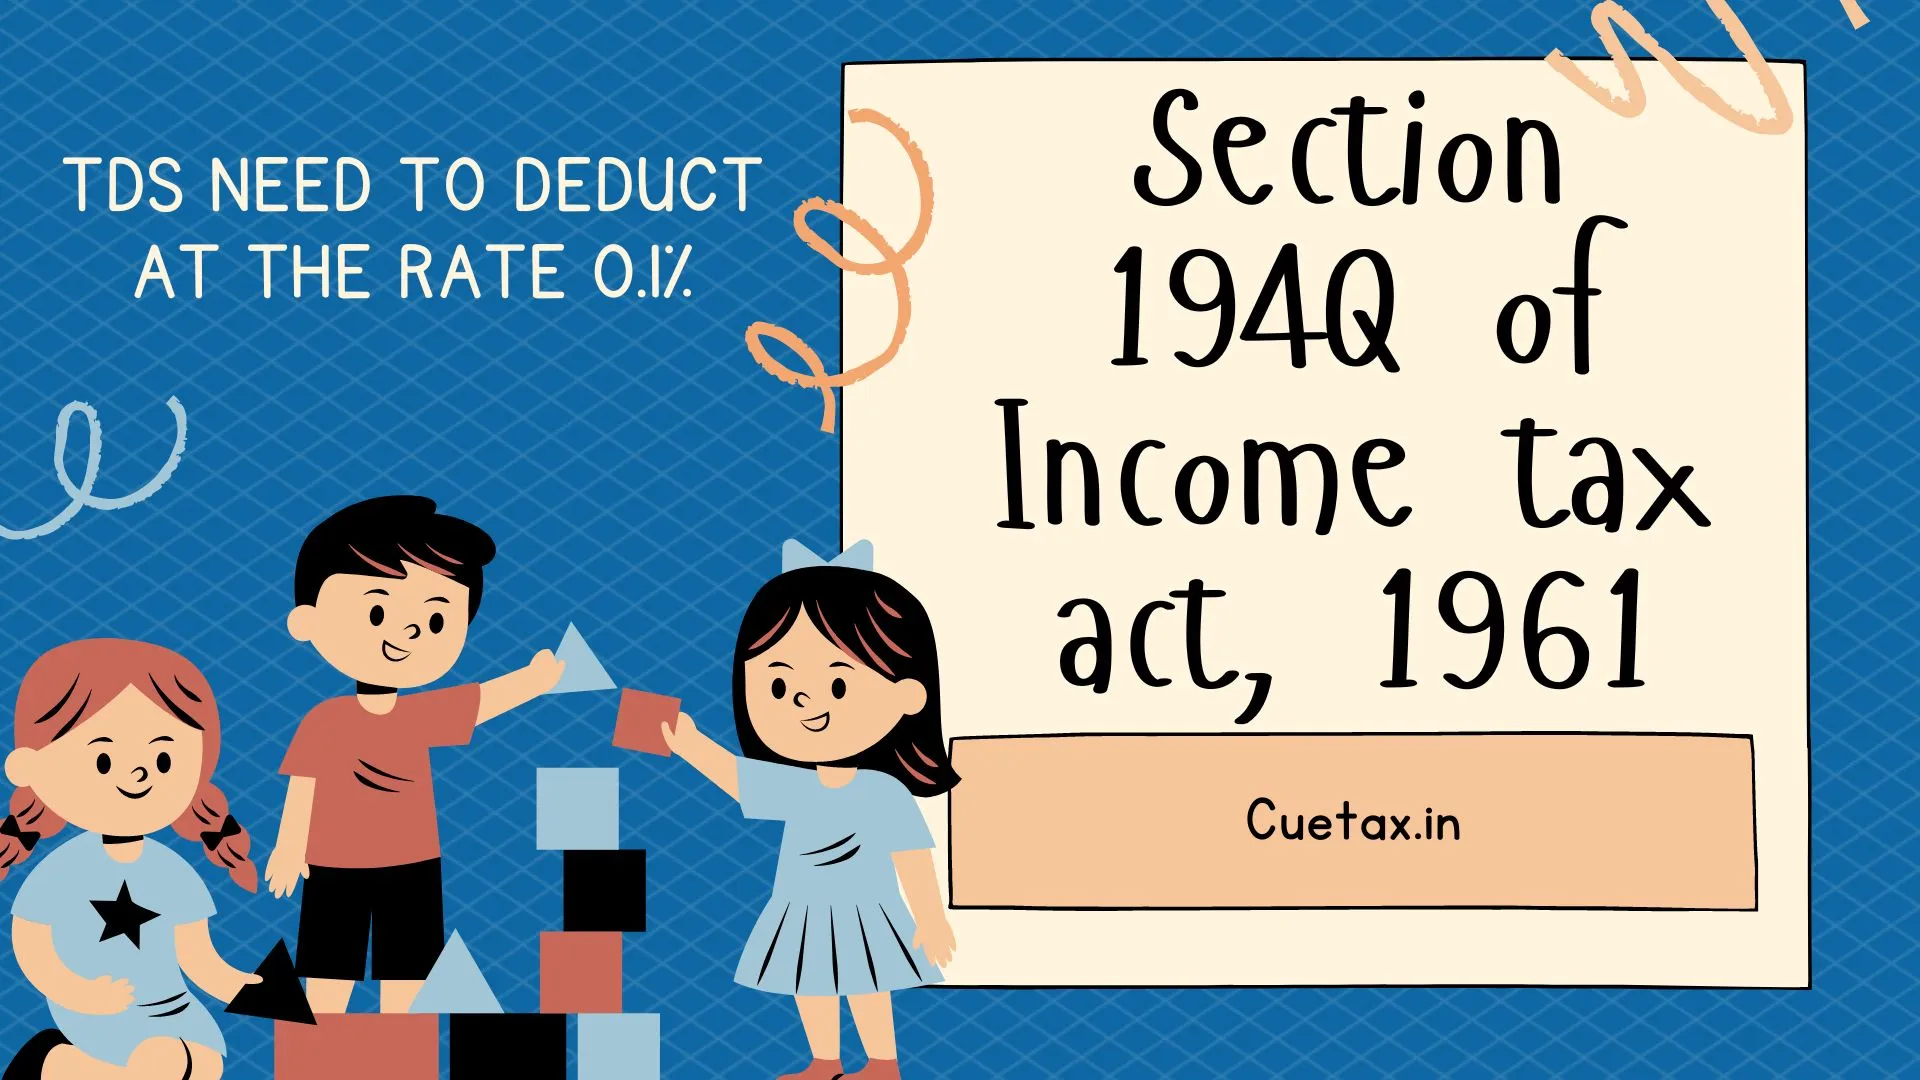 Section-194Q-of-Income-tax-act-1961